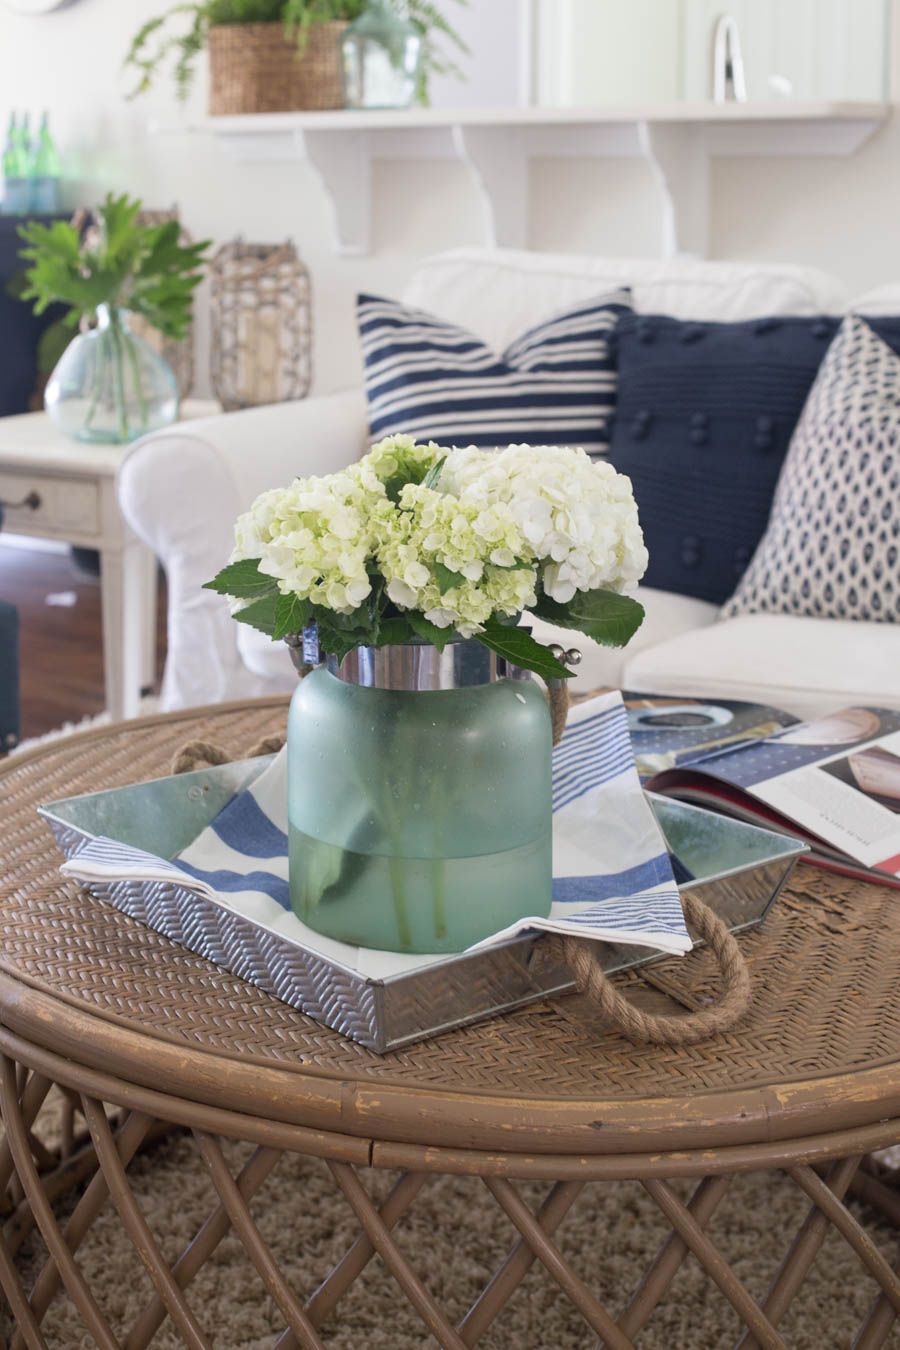 18 Summer Decorating Ideas   Easy Ways to Decorate Your Home for ...